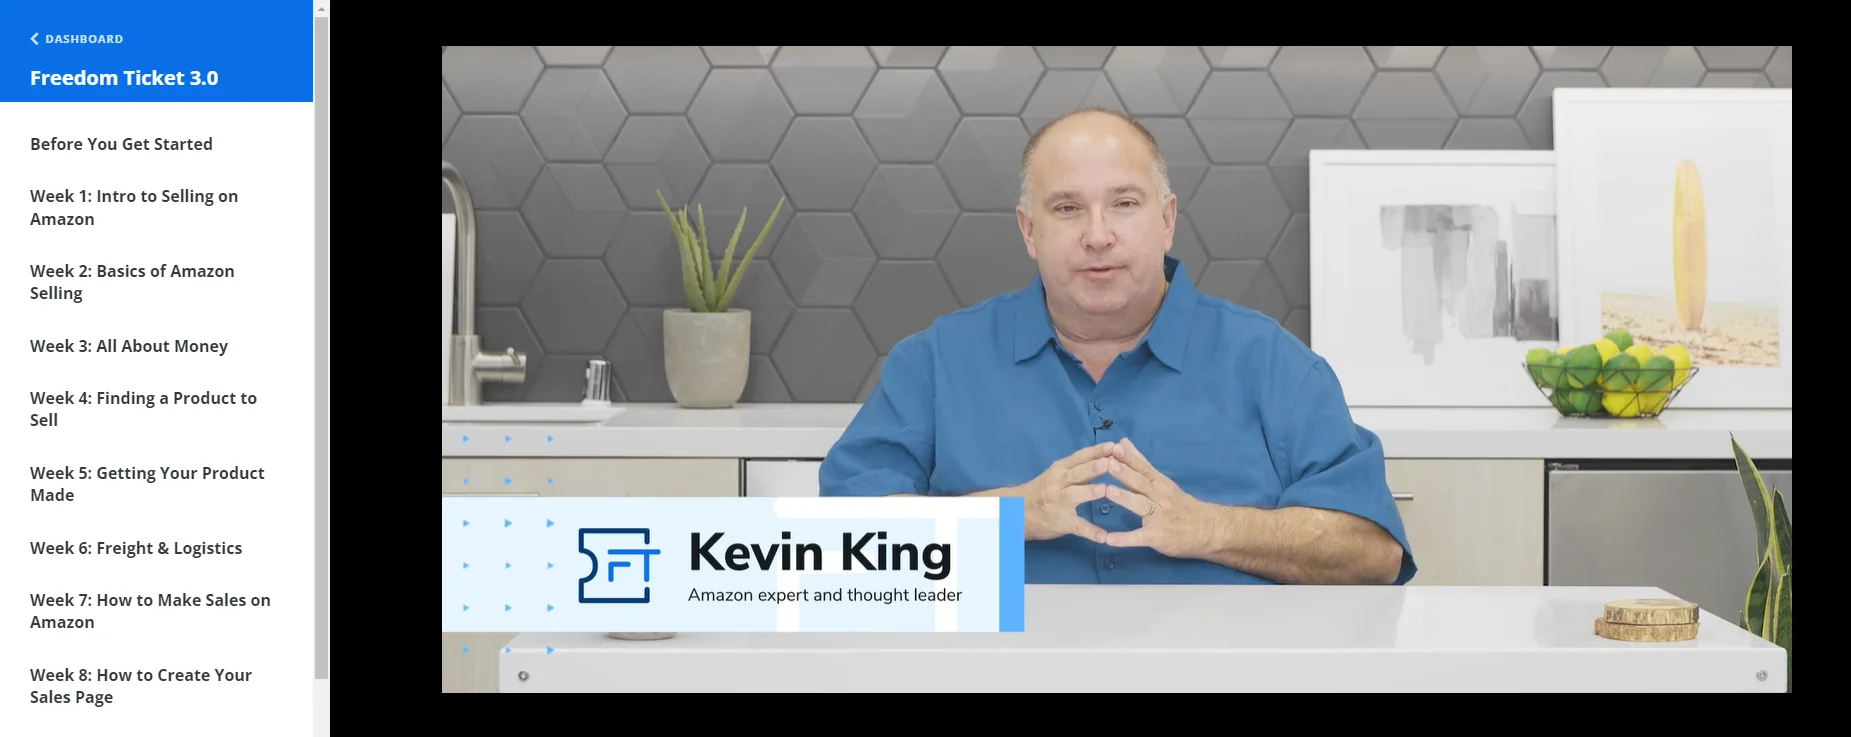 freedom ticket course by kevin king